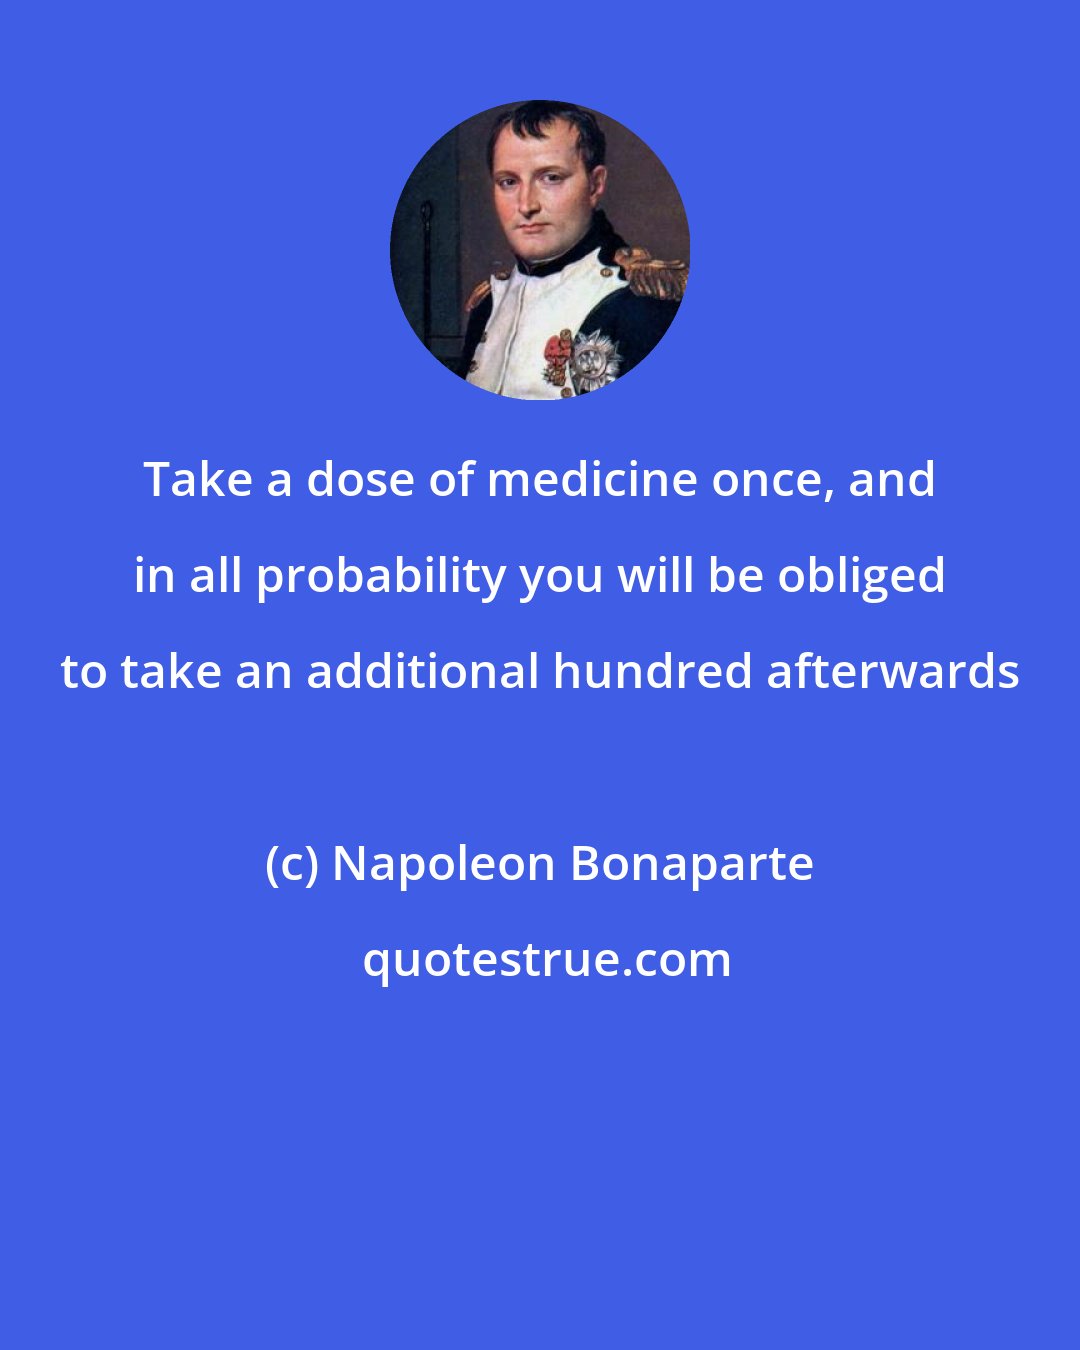 Napoleon Bonaparte: Take a dose of medicine once, and in all probability you will be obliged to take an additional hundred afterwards